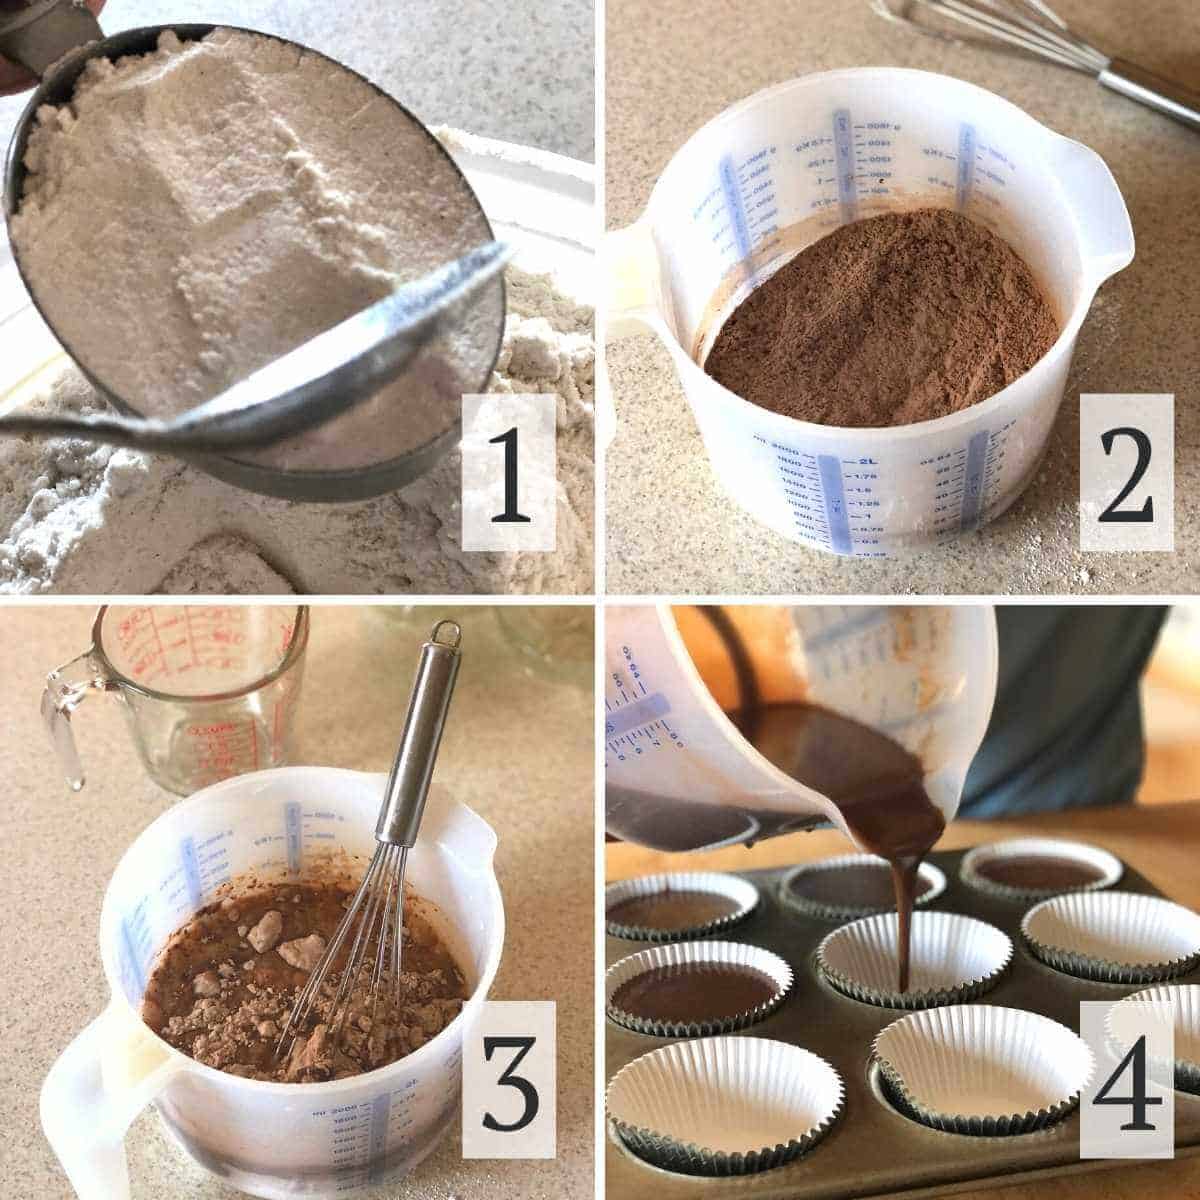 Steps for making chocolate gluten free cupcakes